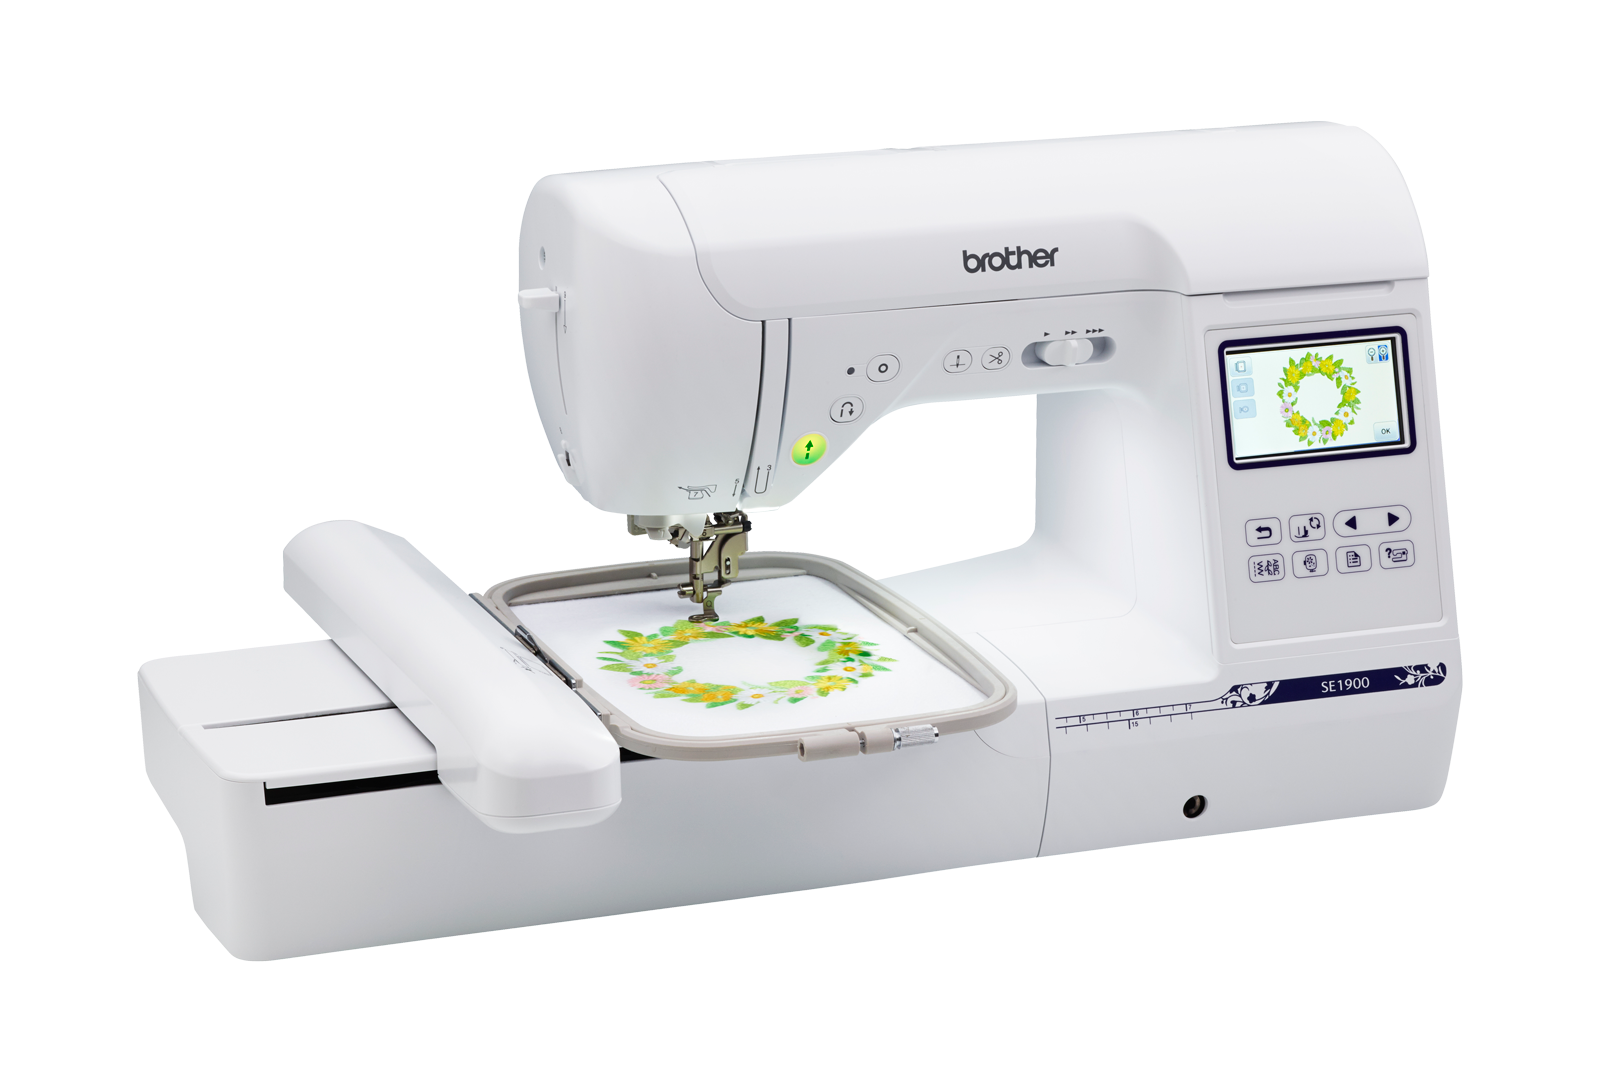 Best Commercial Embroidery Machine